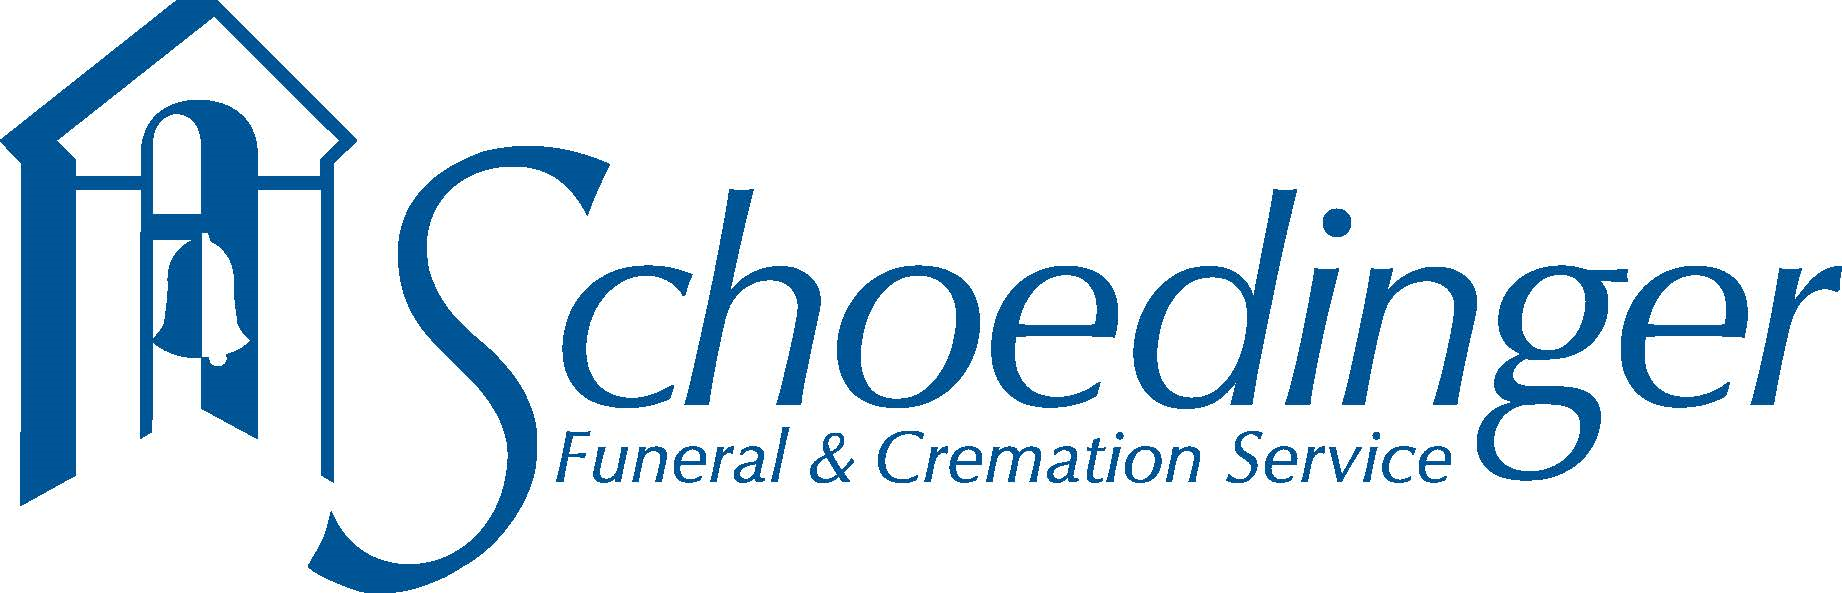 Schoedinger Funeral and Cremation Service Company Logo